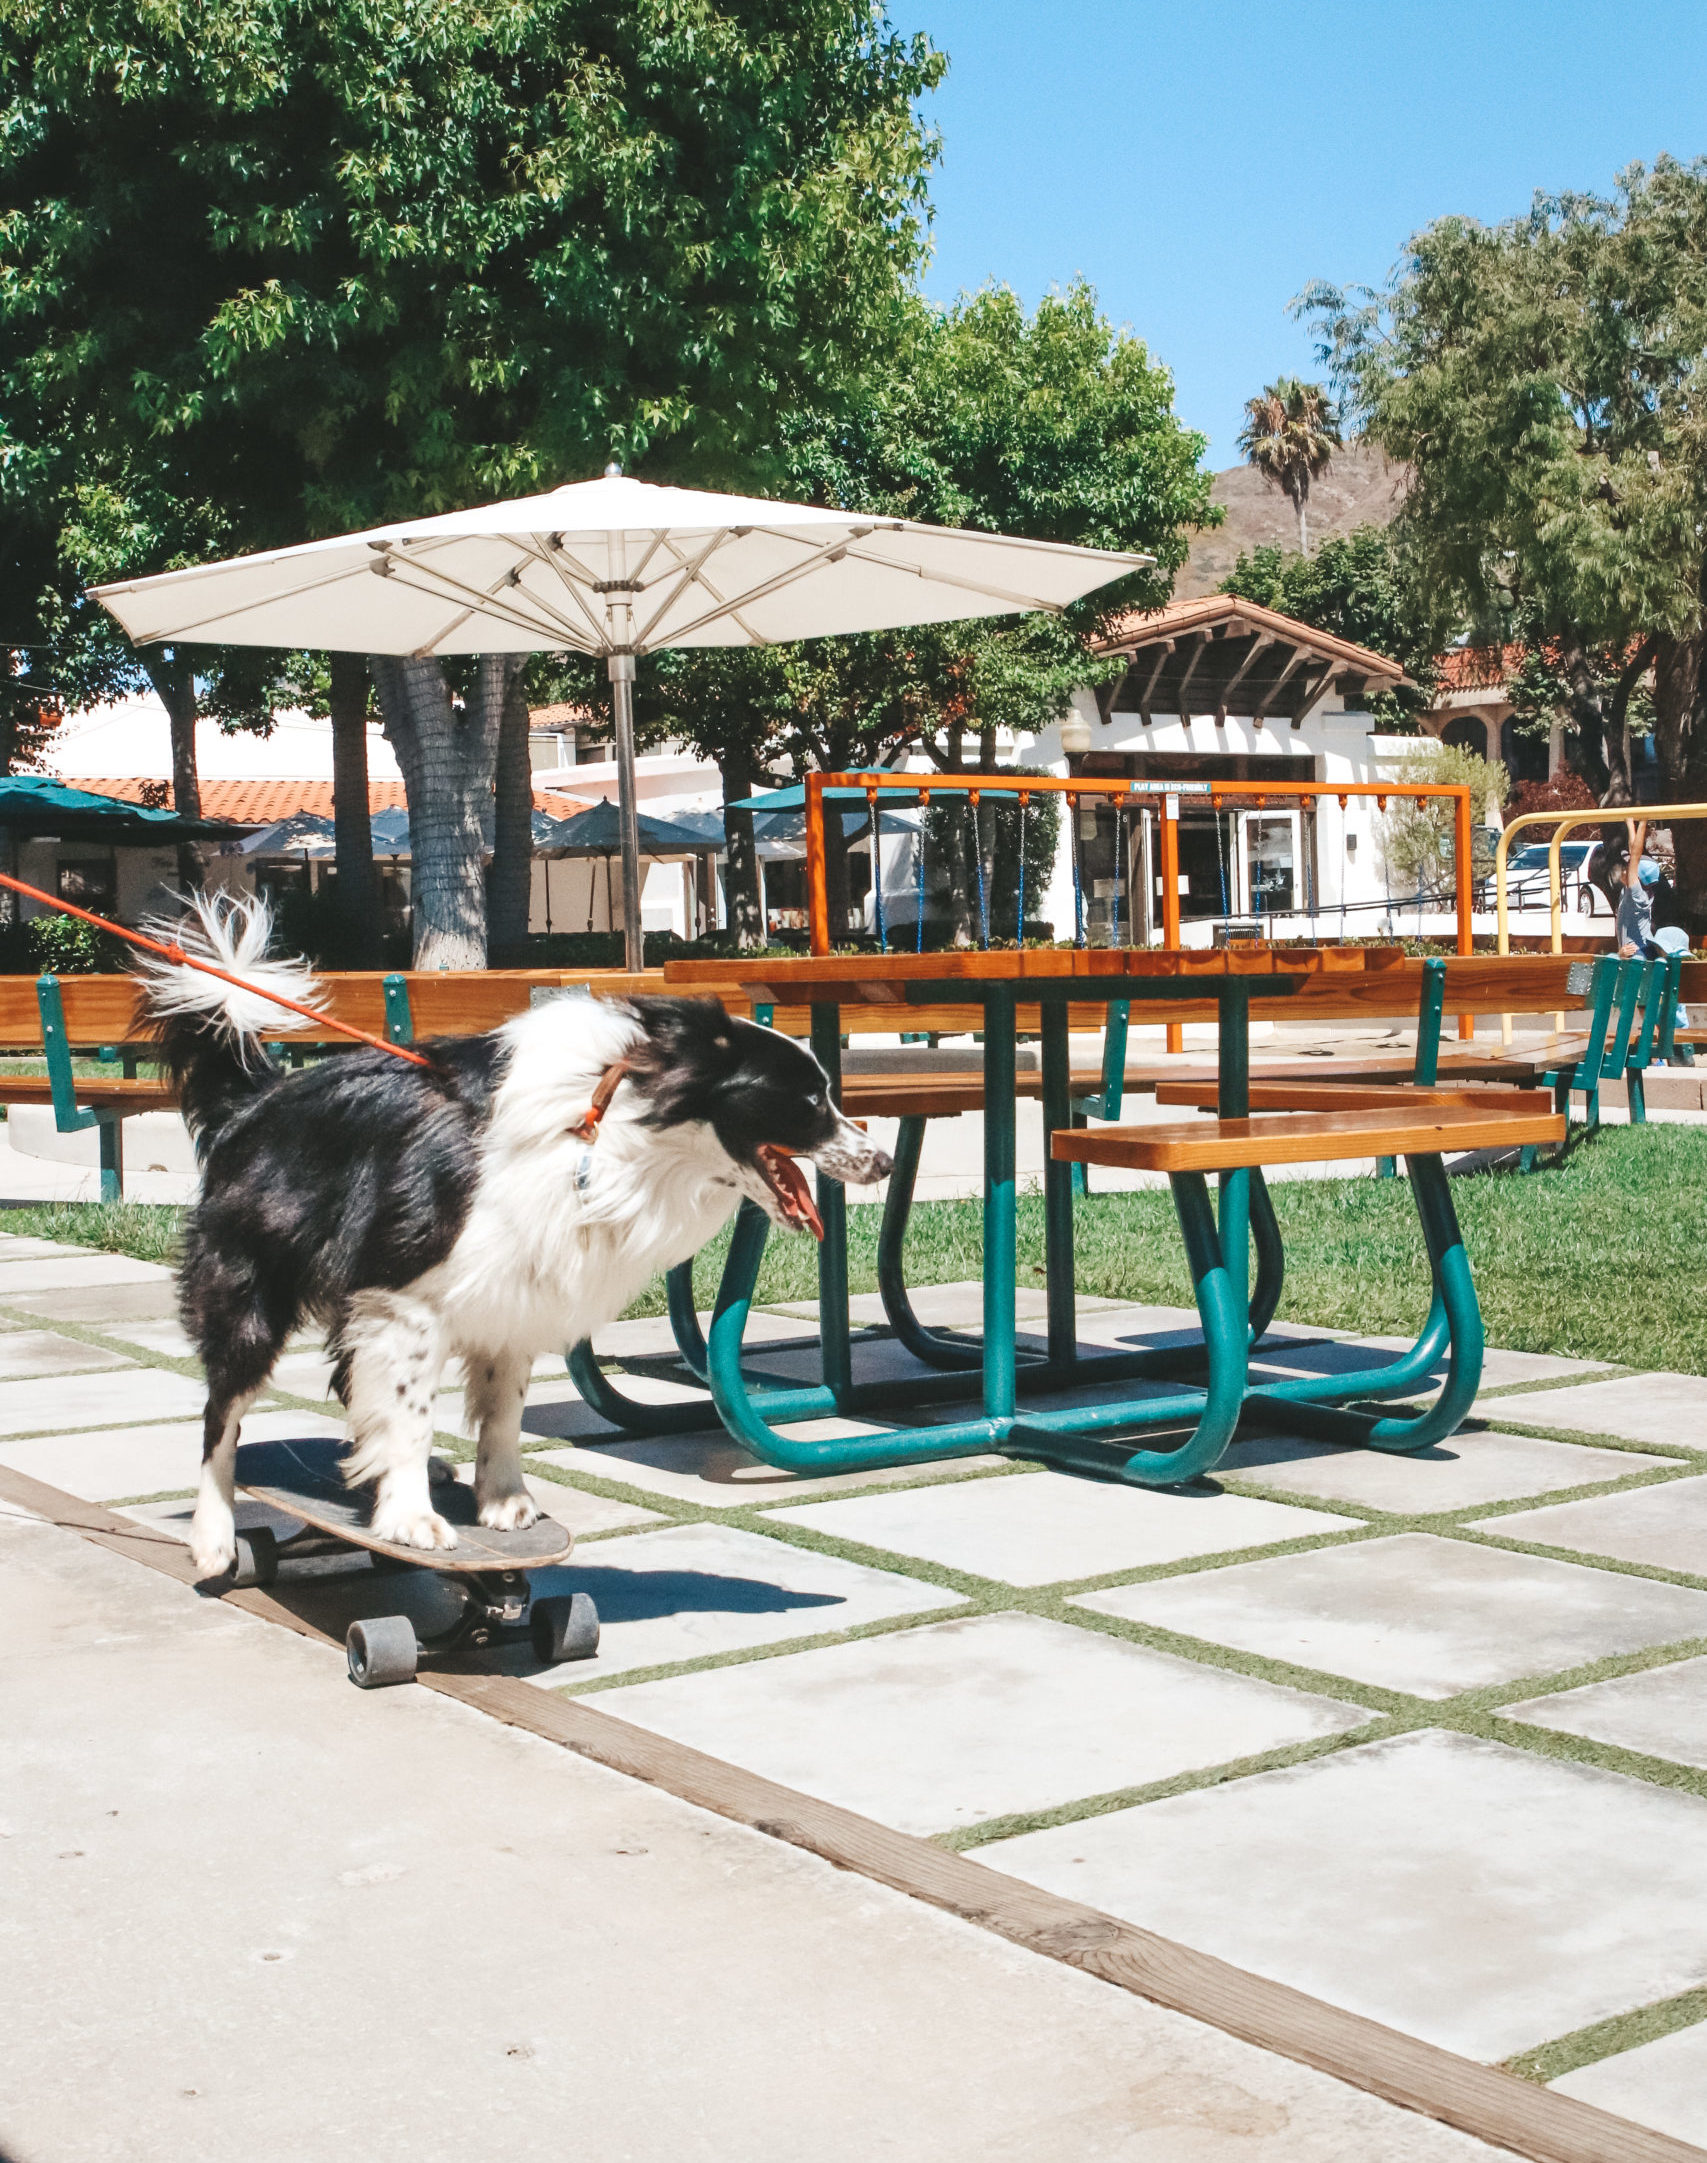 Pets are always welcome at Malibu Country Mart! Skateboarding, however, is discouraged.